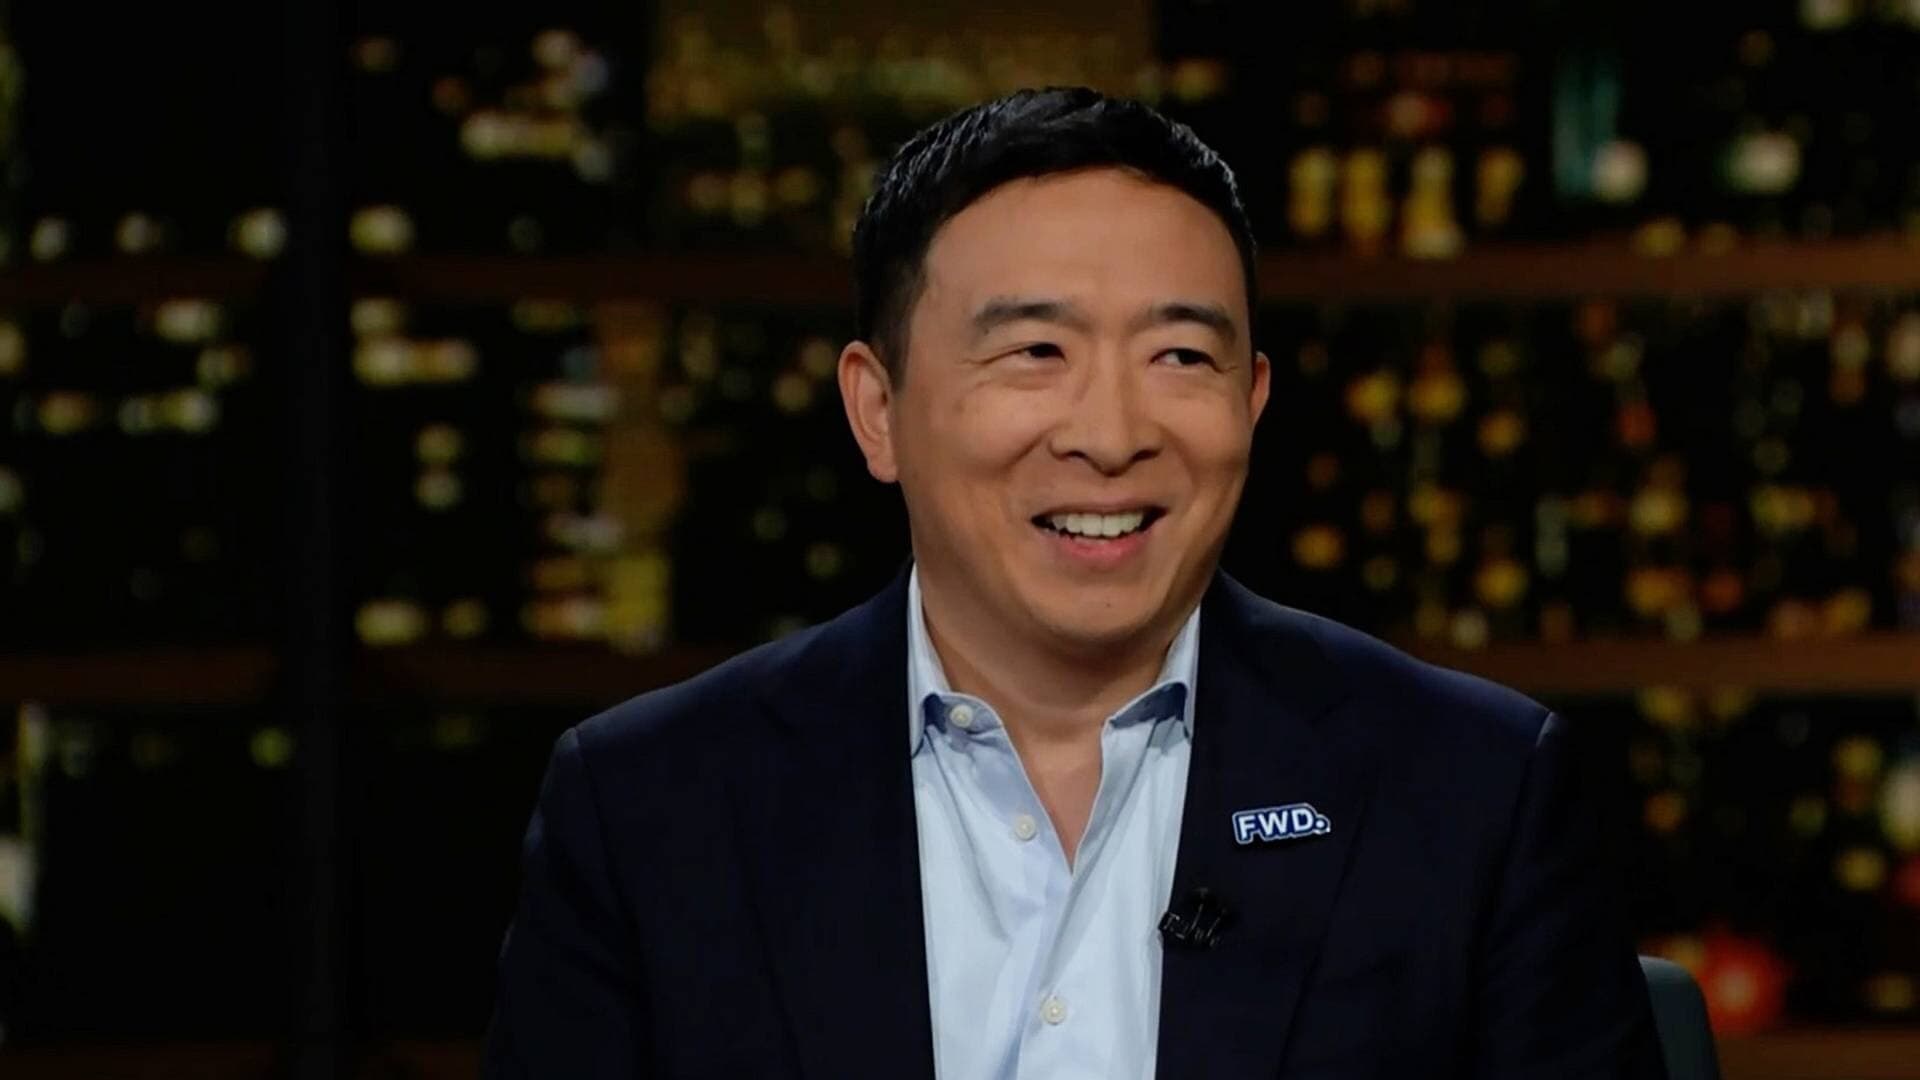 Real Time with Bill Maher Season 20 :Episode 10  April 1, 2022: Nicole Perlroth, Laura Coates, Andrew Yang